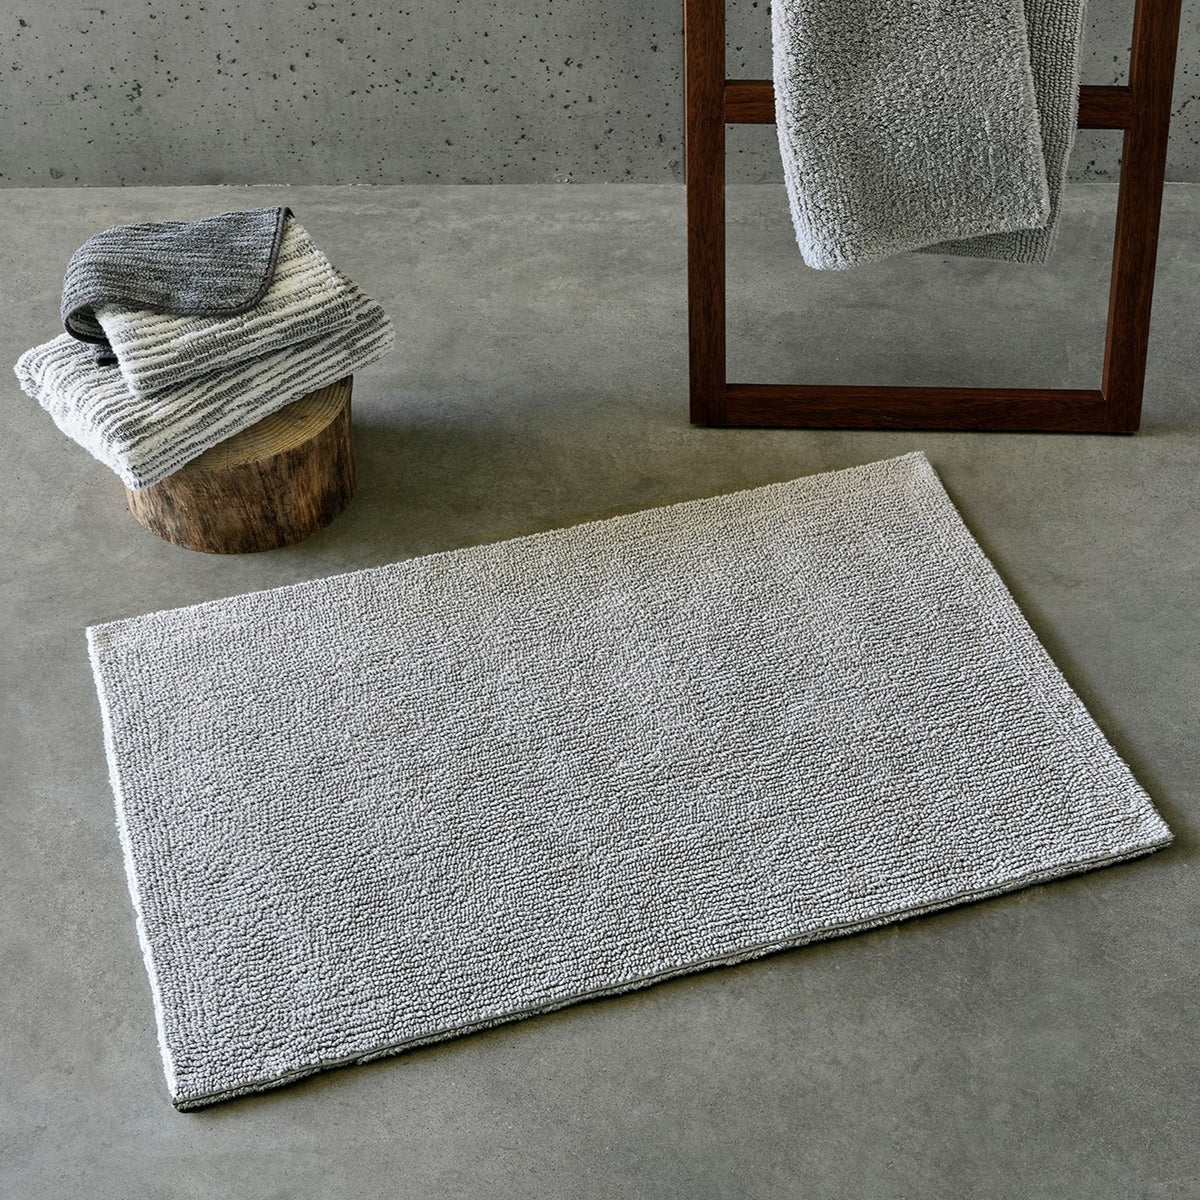 Lifestyle Shot of Abyss Habidecor Bay Bath Rugs in Color White